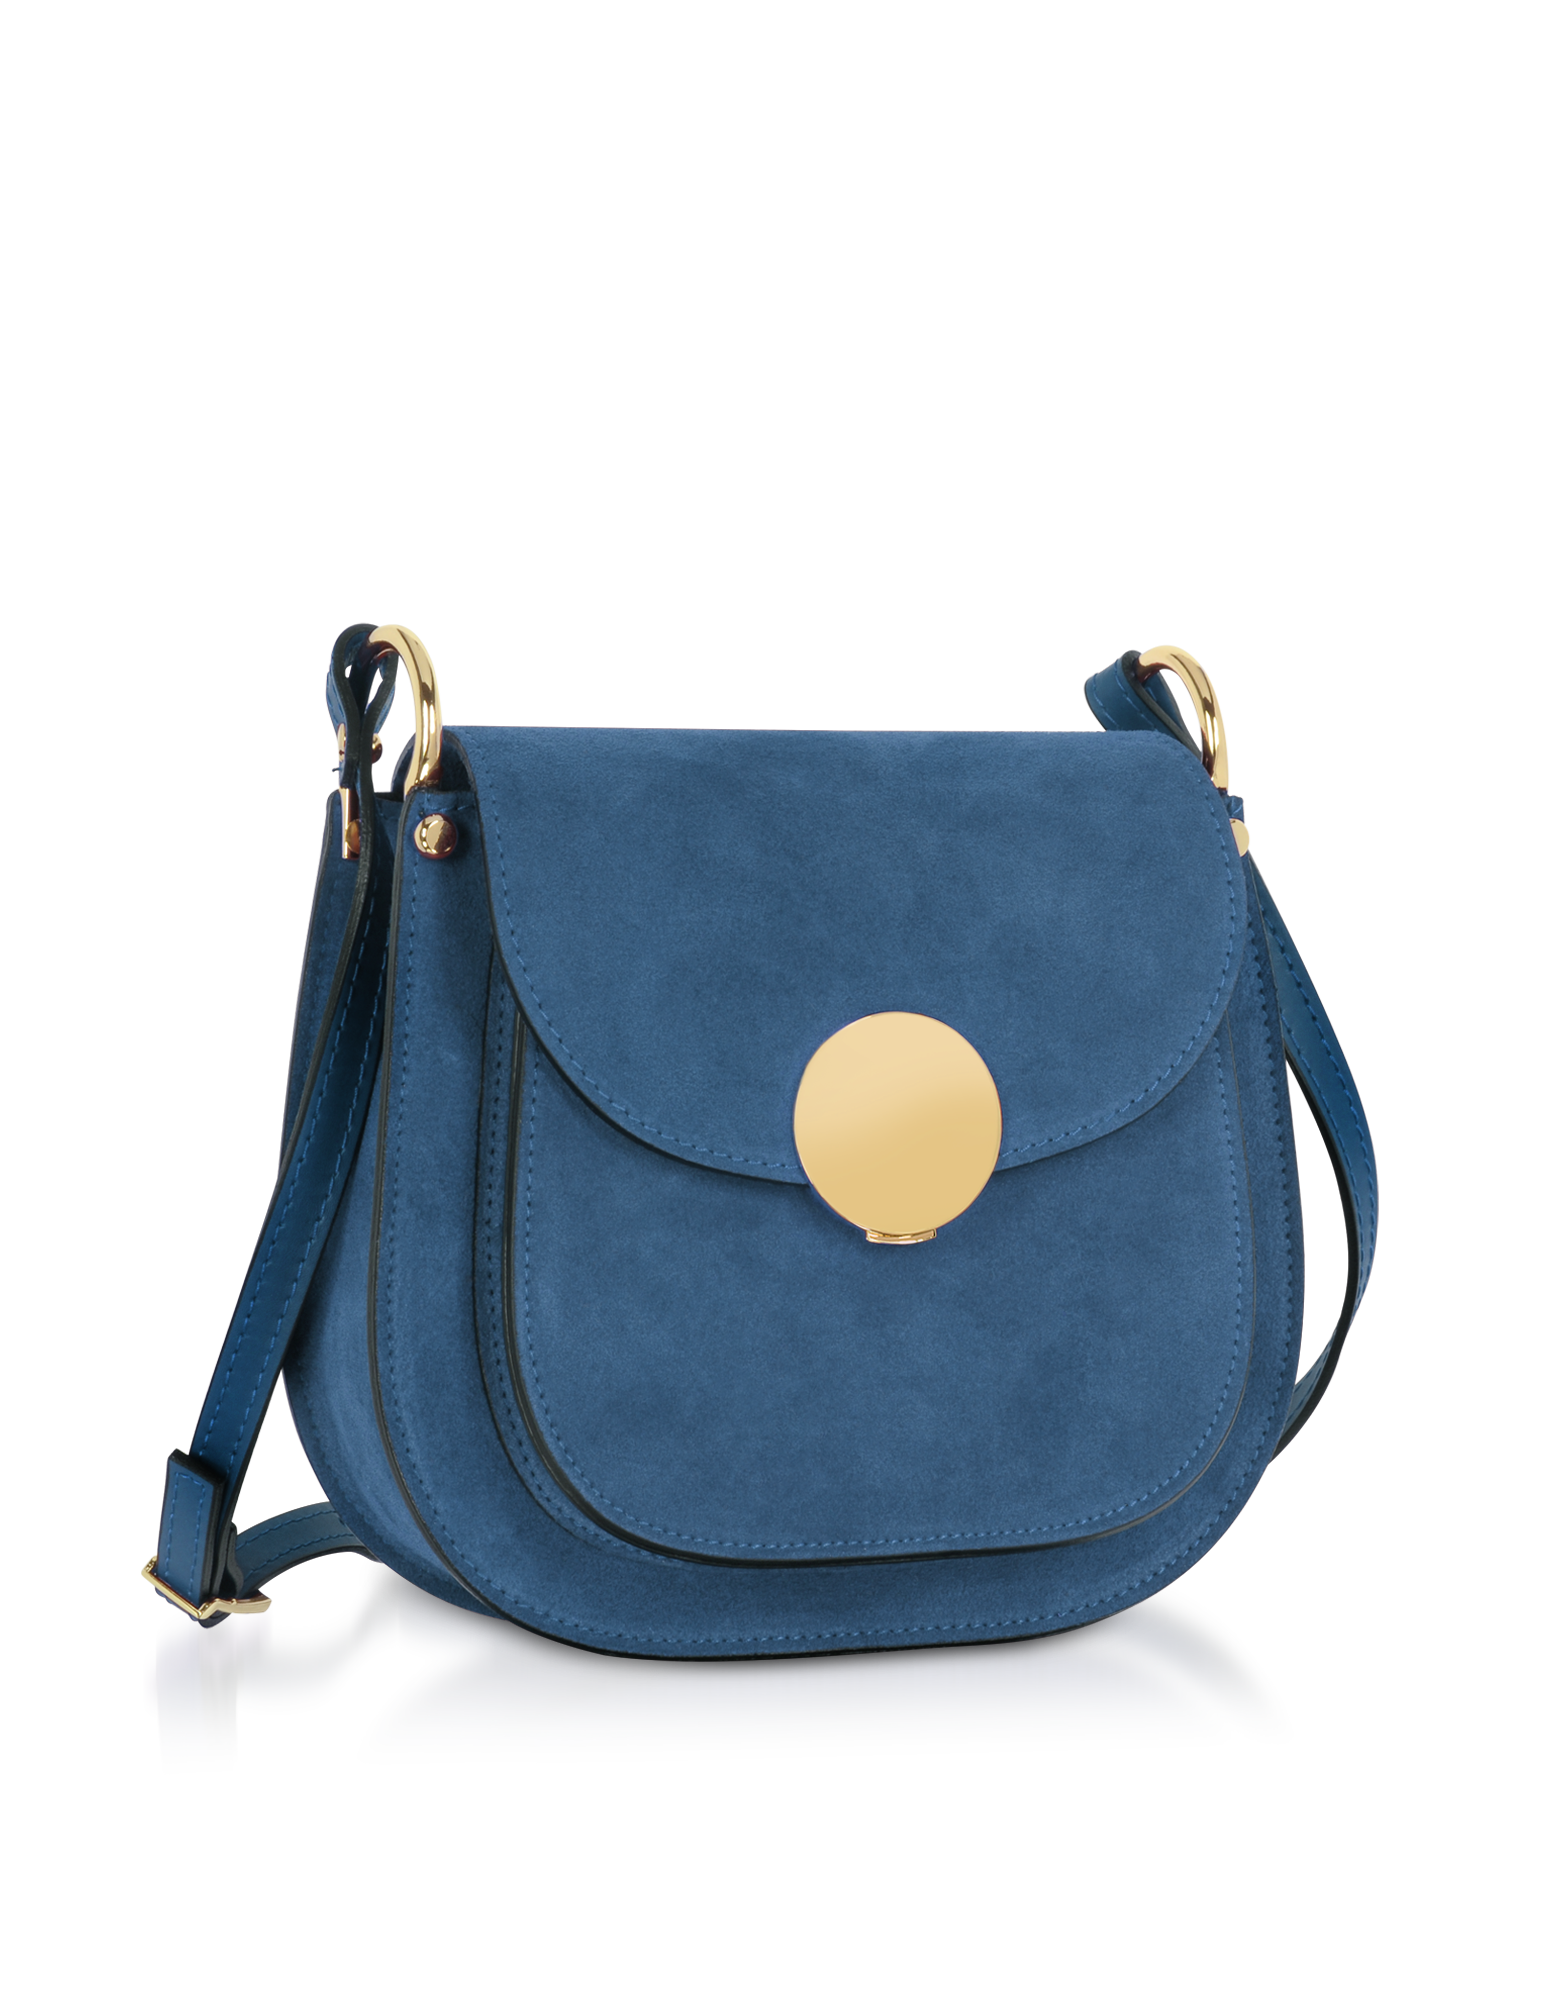 Agave Suede and Smooth Leather Shoulder Bag